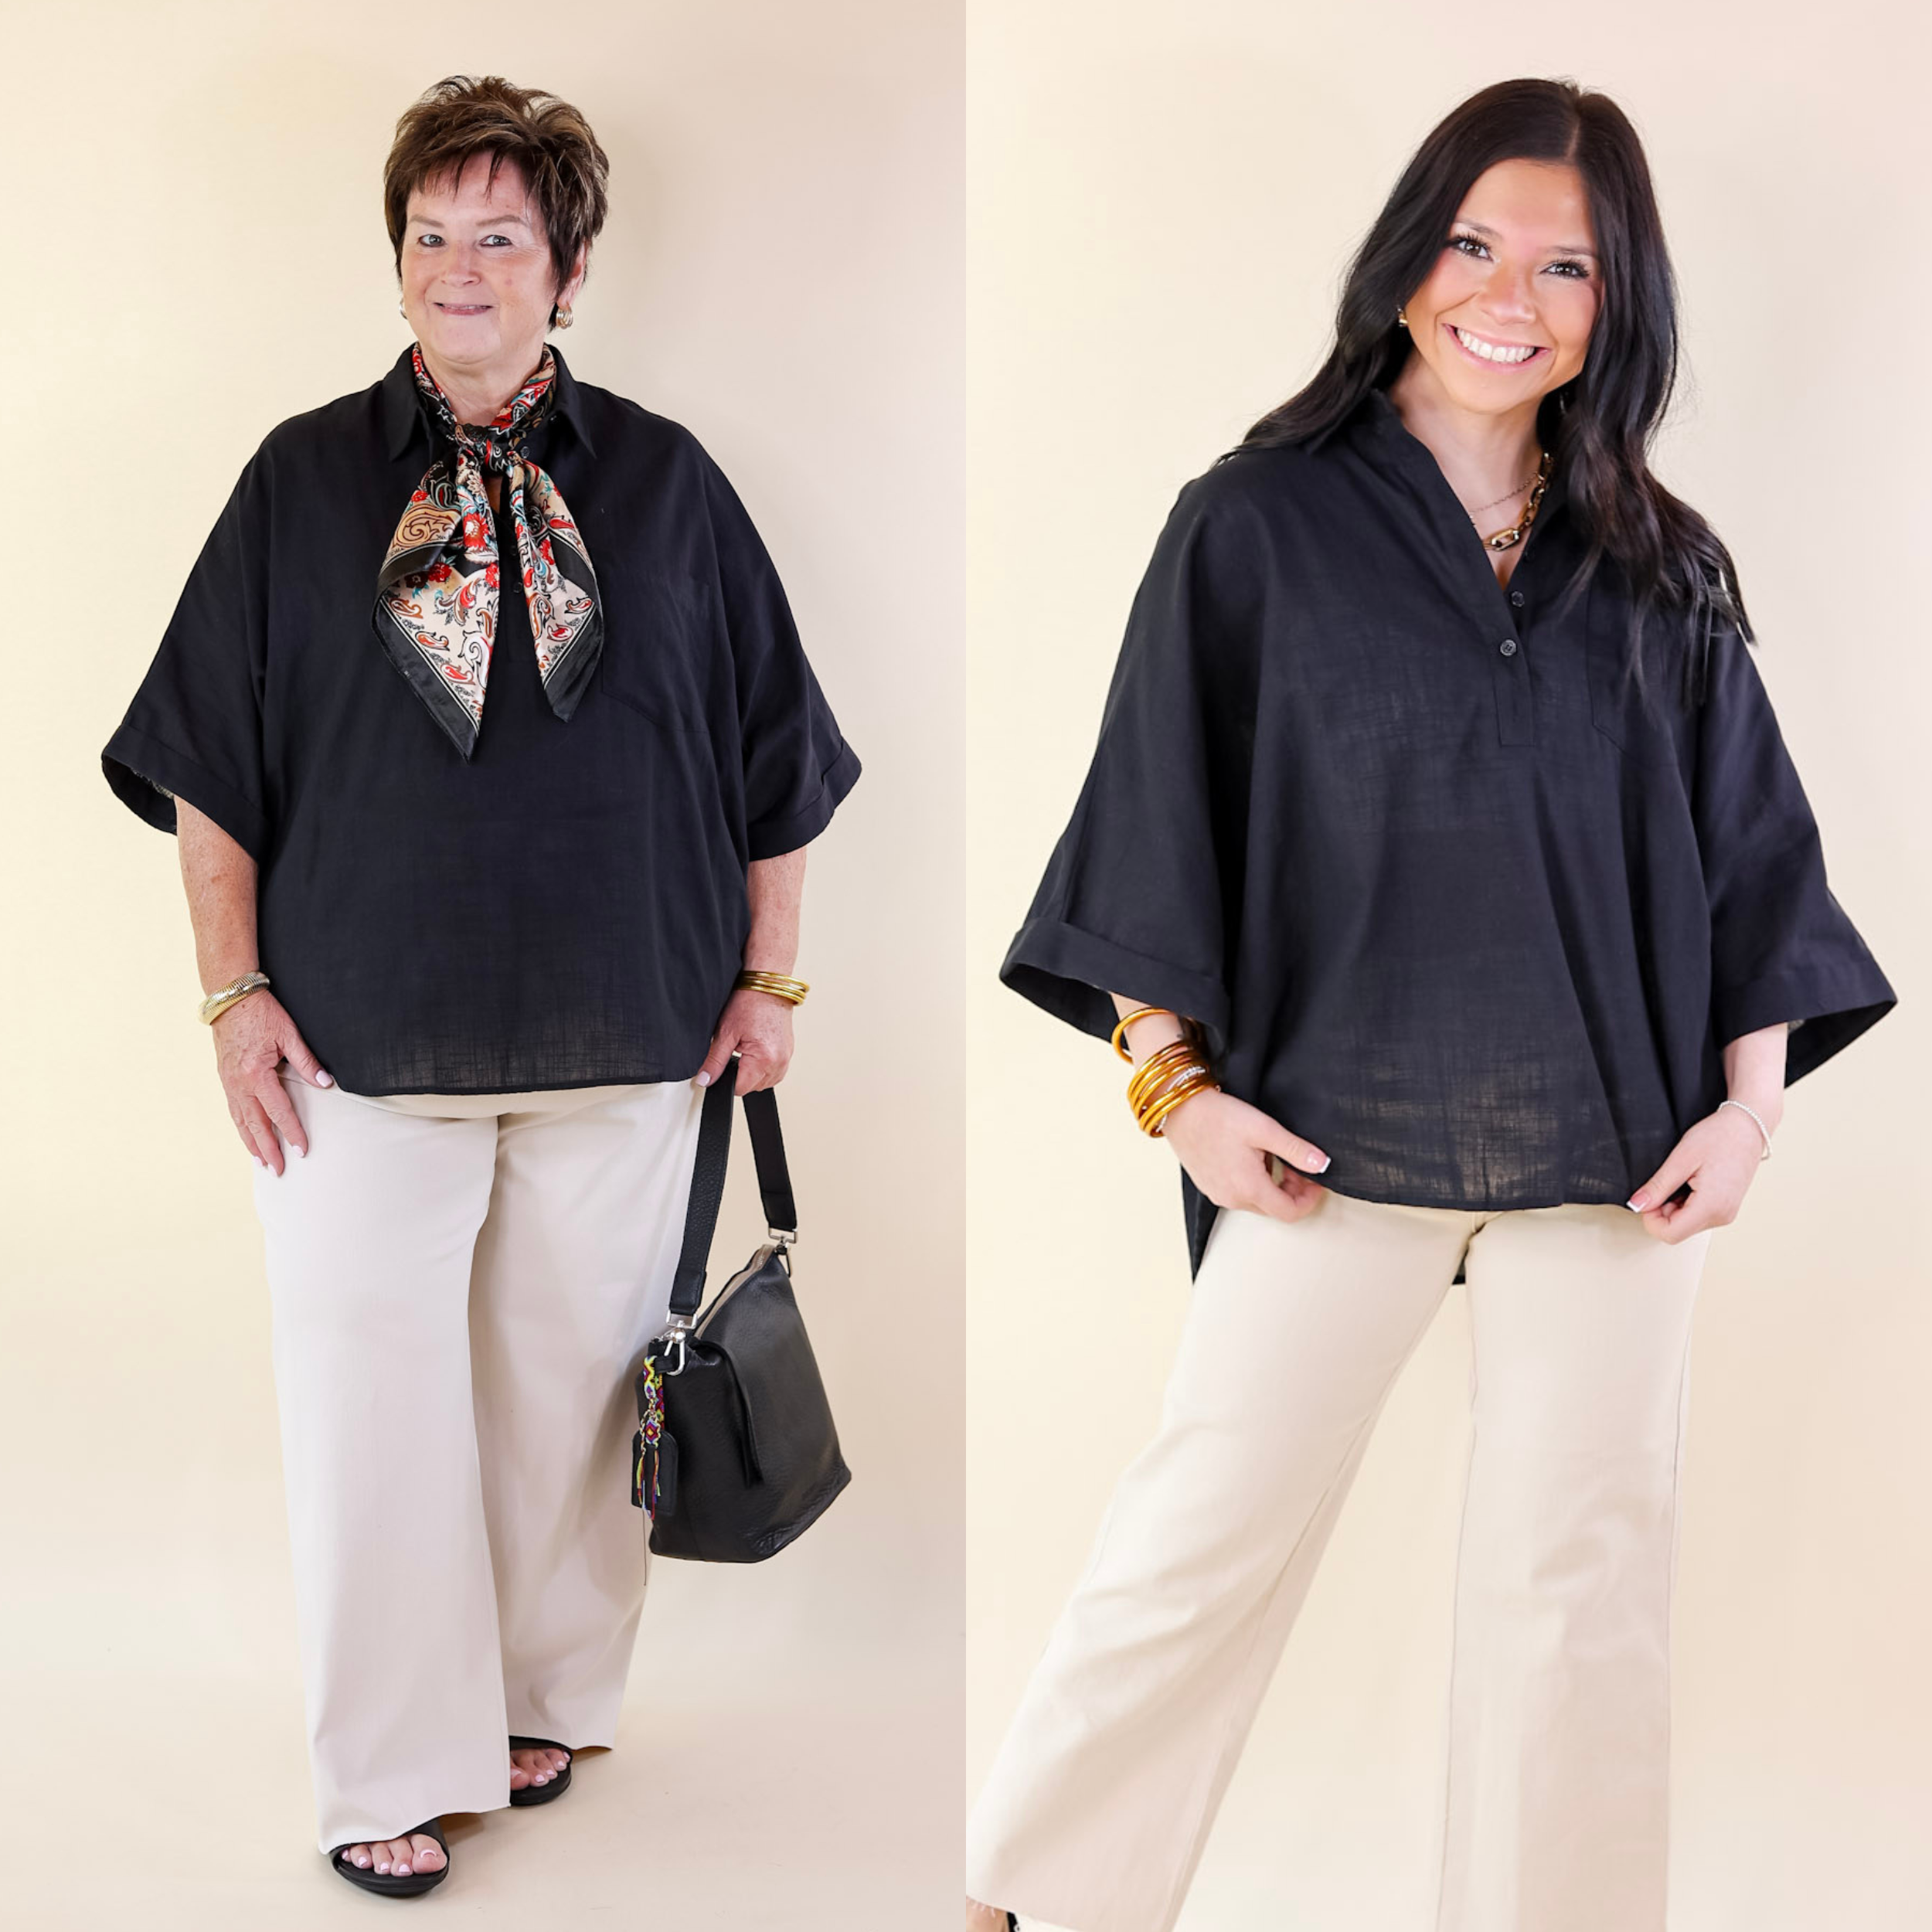 Sweet Surprise Half Button Up Poncho Top with Collared Neckline in Black